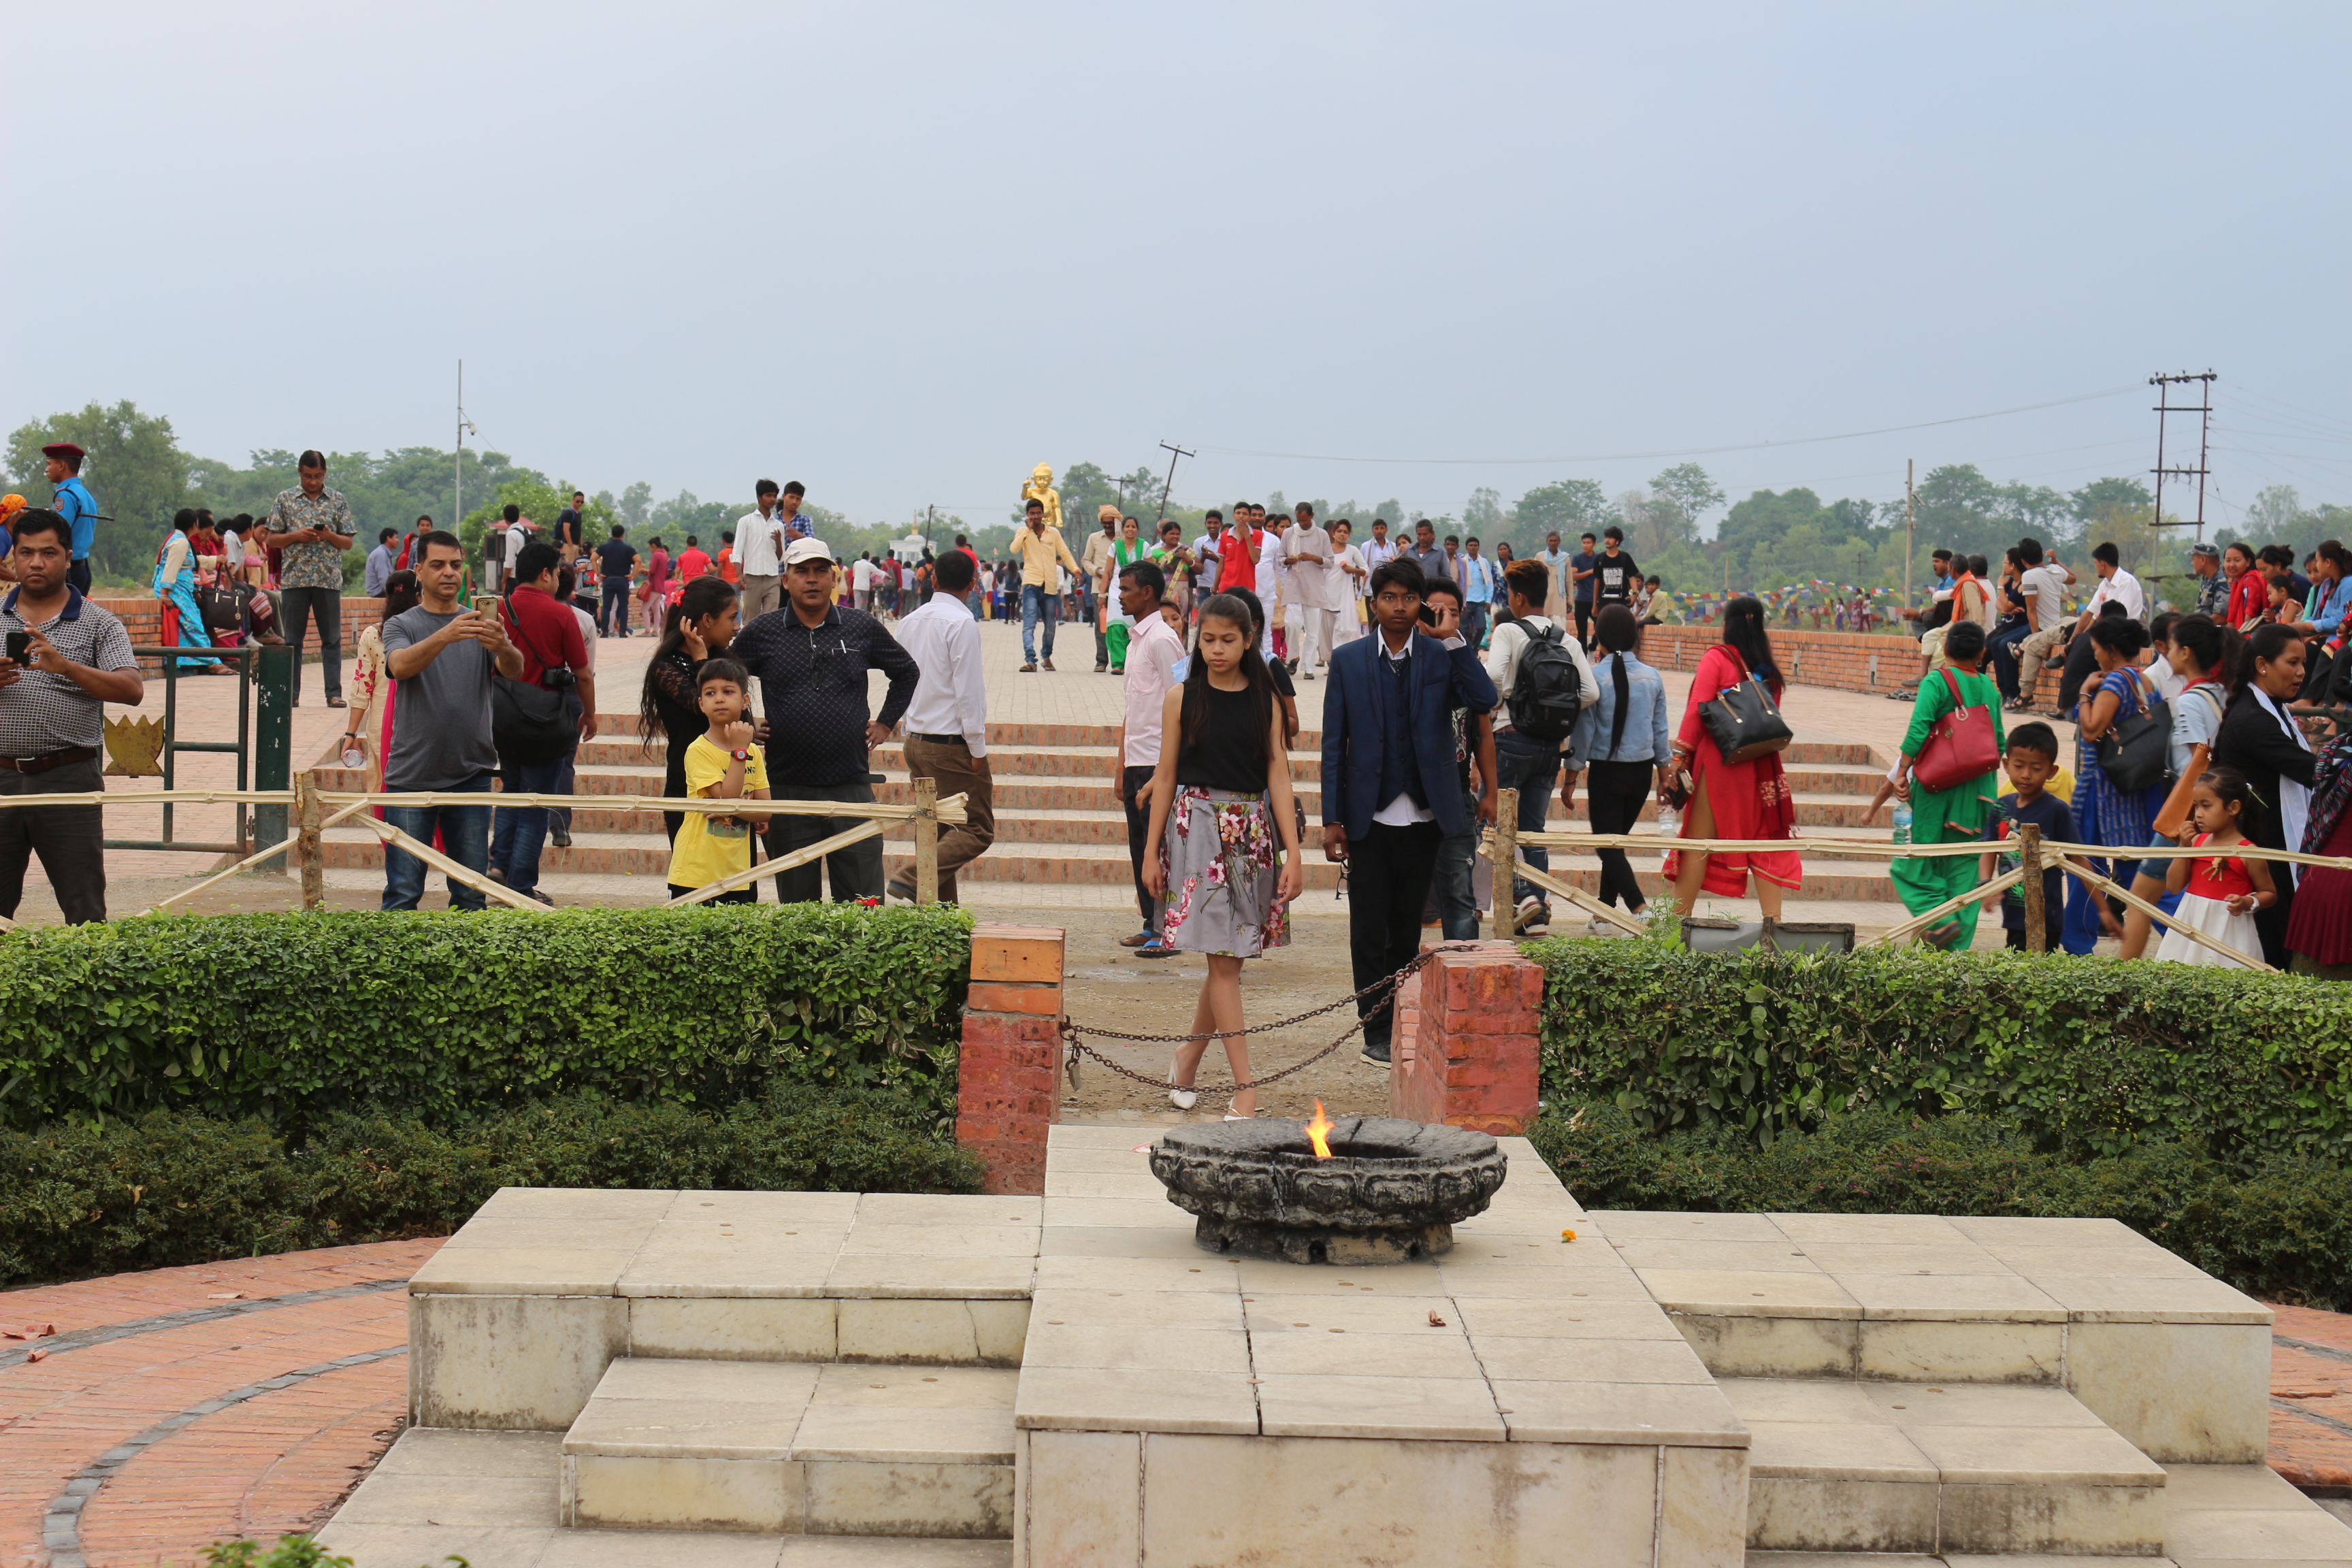 Construction of Indian Buddhist culture and heritage center  in Lumbini kicks off